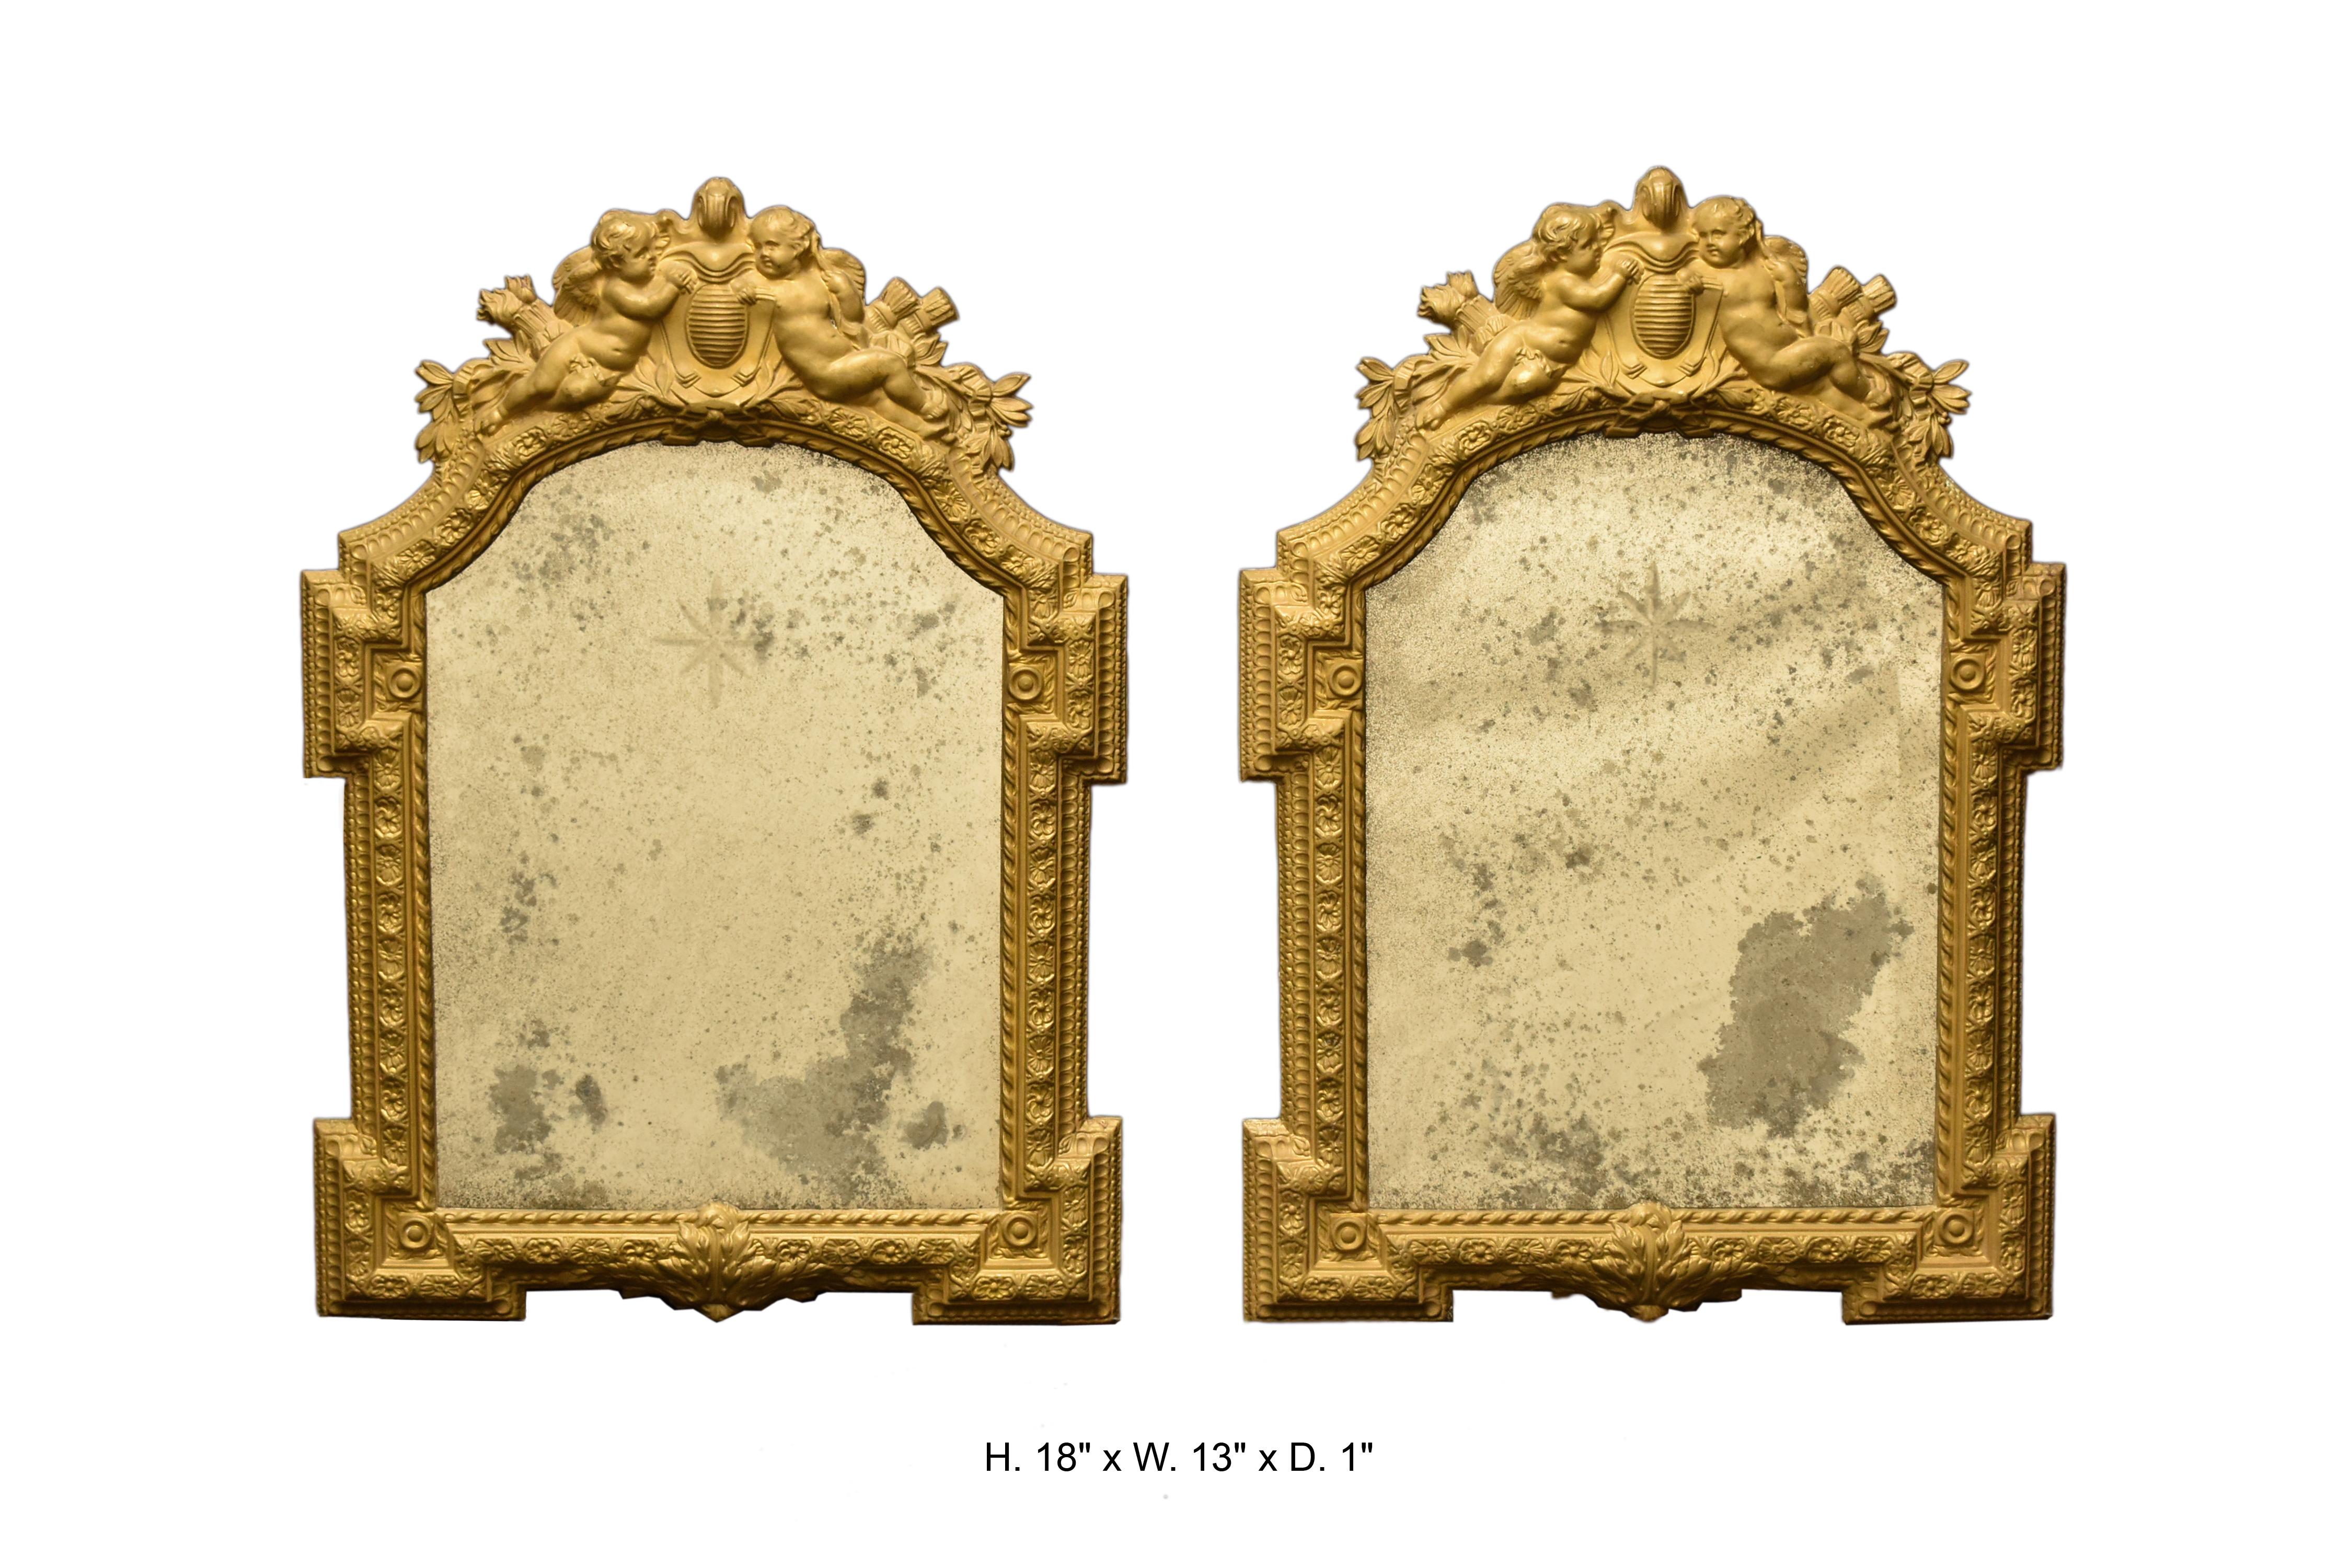 A beautiful pair of Italian repousse small mirrors, Mid 20th century 

Each mirror is surmounted with a cresting centered by a crest flanked with two finely crafted repousse brass cherubs amongst foliage, above an engraved shaped mirror plate in a